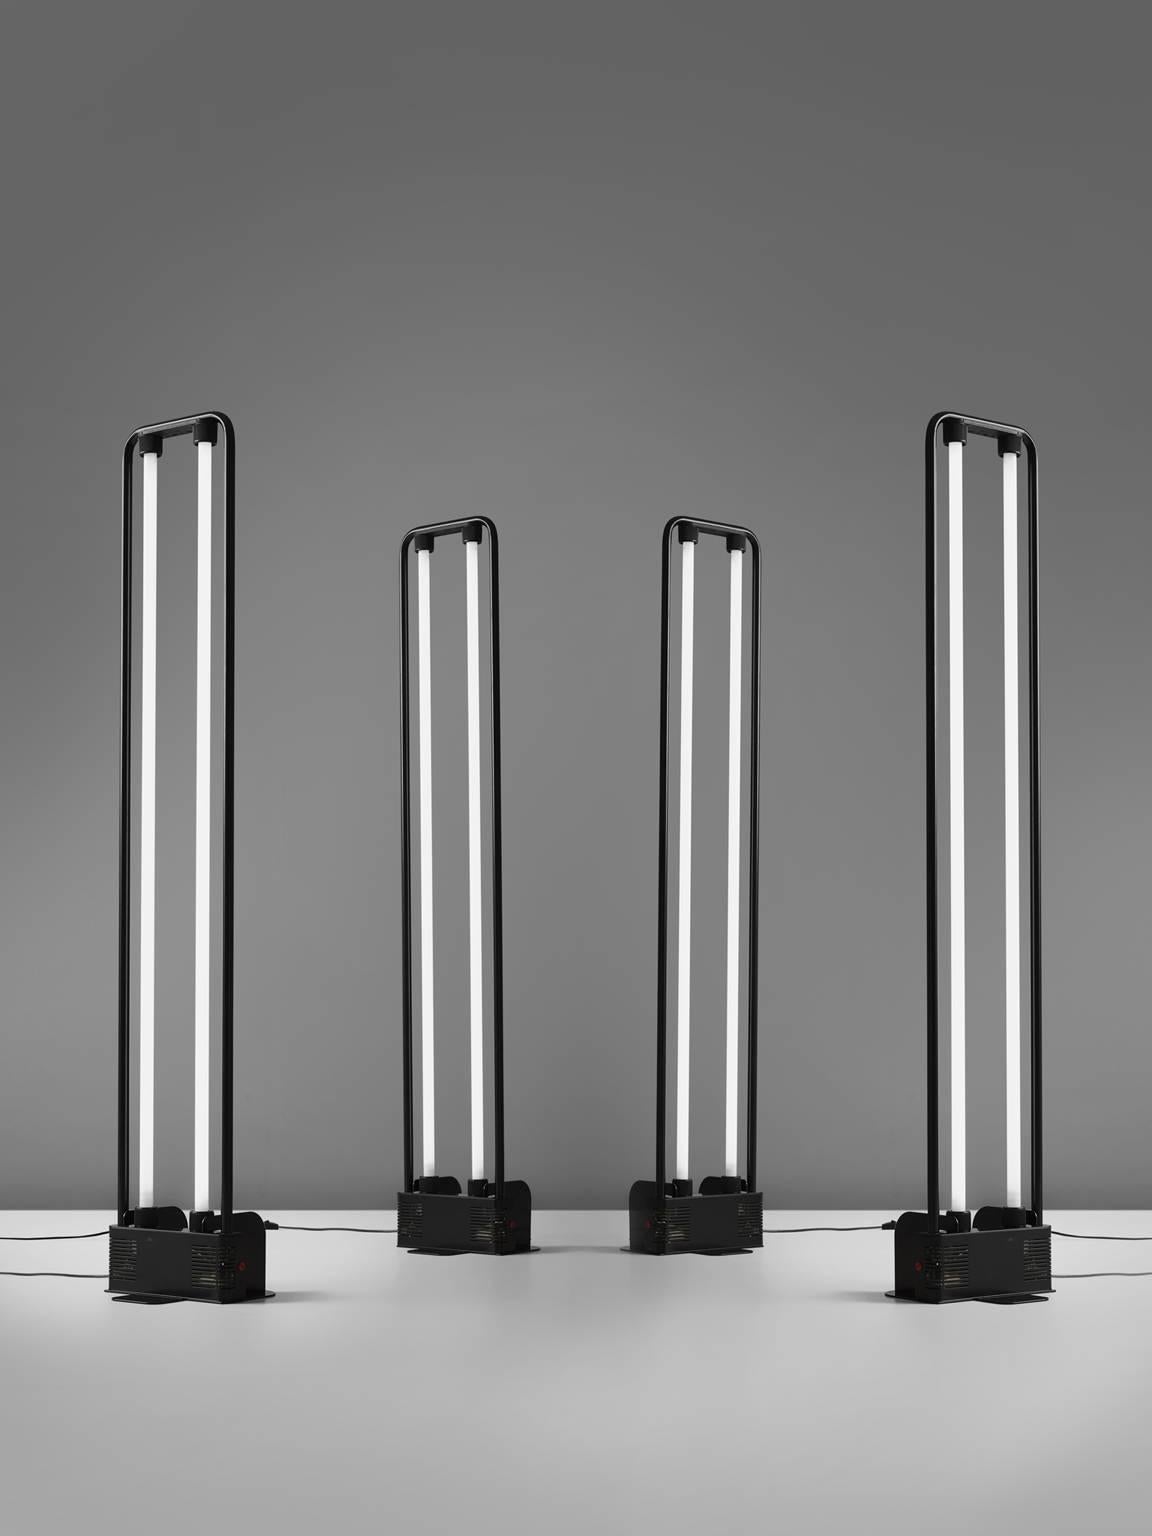 Gian Nicola Gigante for Zerbetto, four floor lamps, black coated metal and glass, Italy, 1980s. 

These Postmodern floor lamps are designed by Italian designer Gian Nicola Gigante. Gigante is known for his fluorescent floor lamps. These lights are